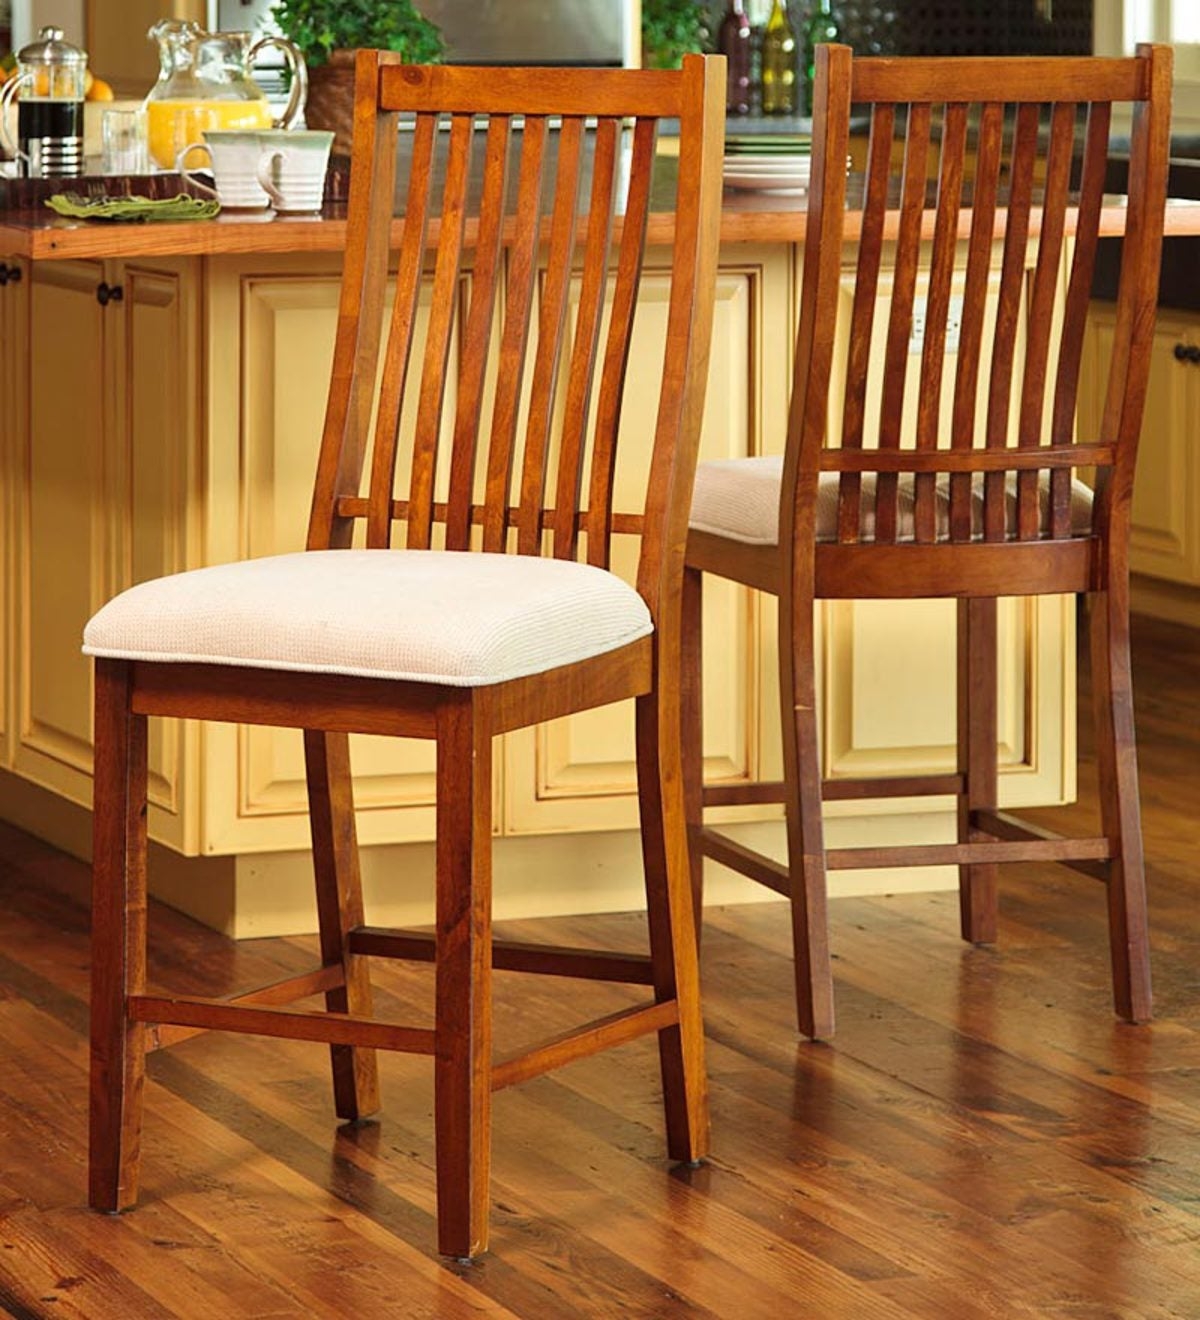 Home upholstered mission counter stools and benches